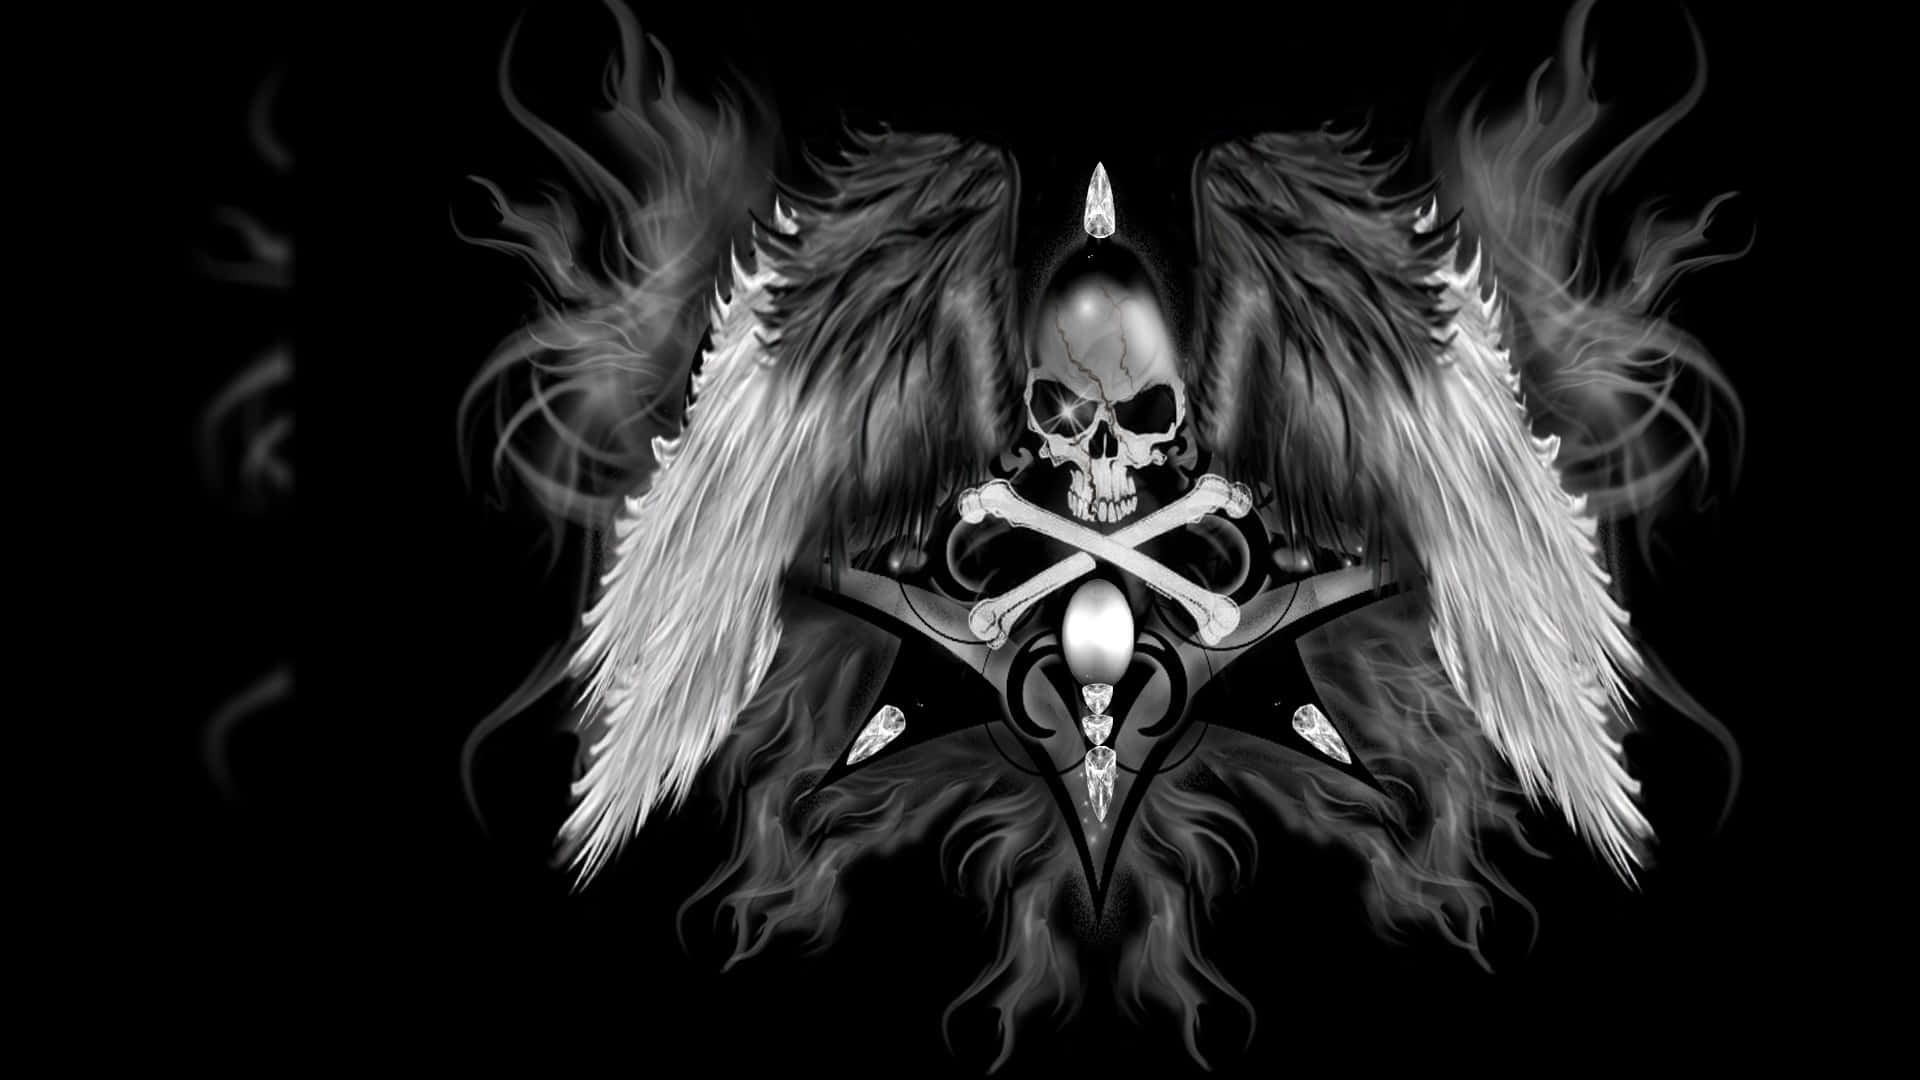 Unlock the secrets of mortality with this awesome skull Wallpaper